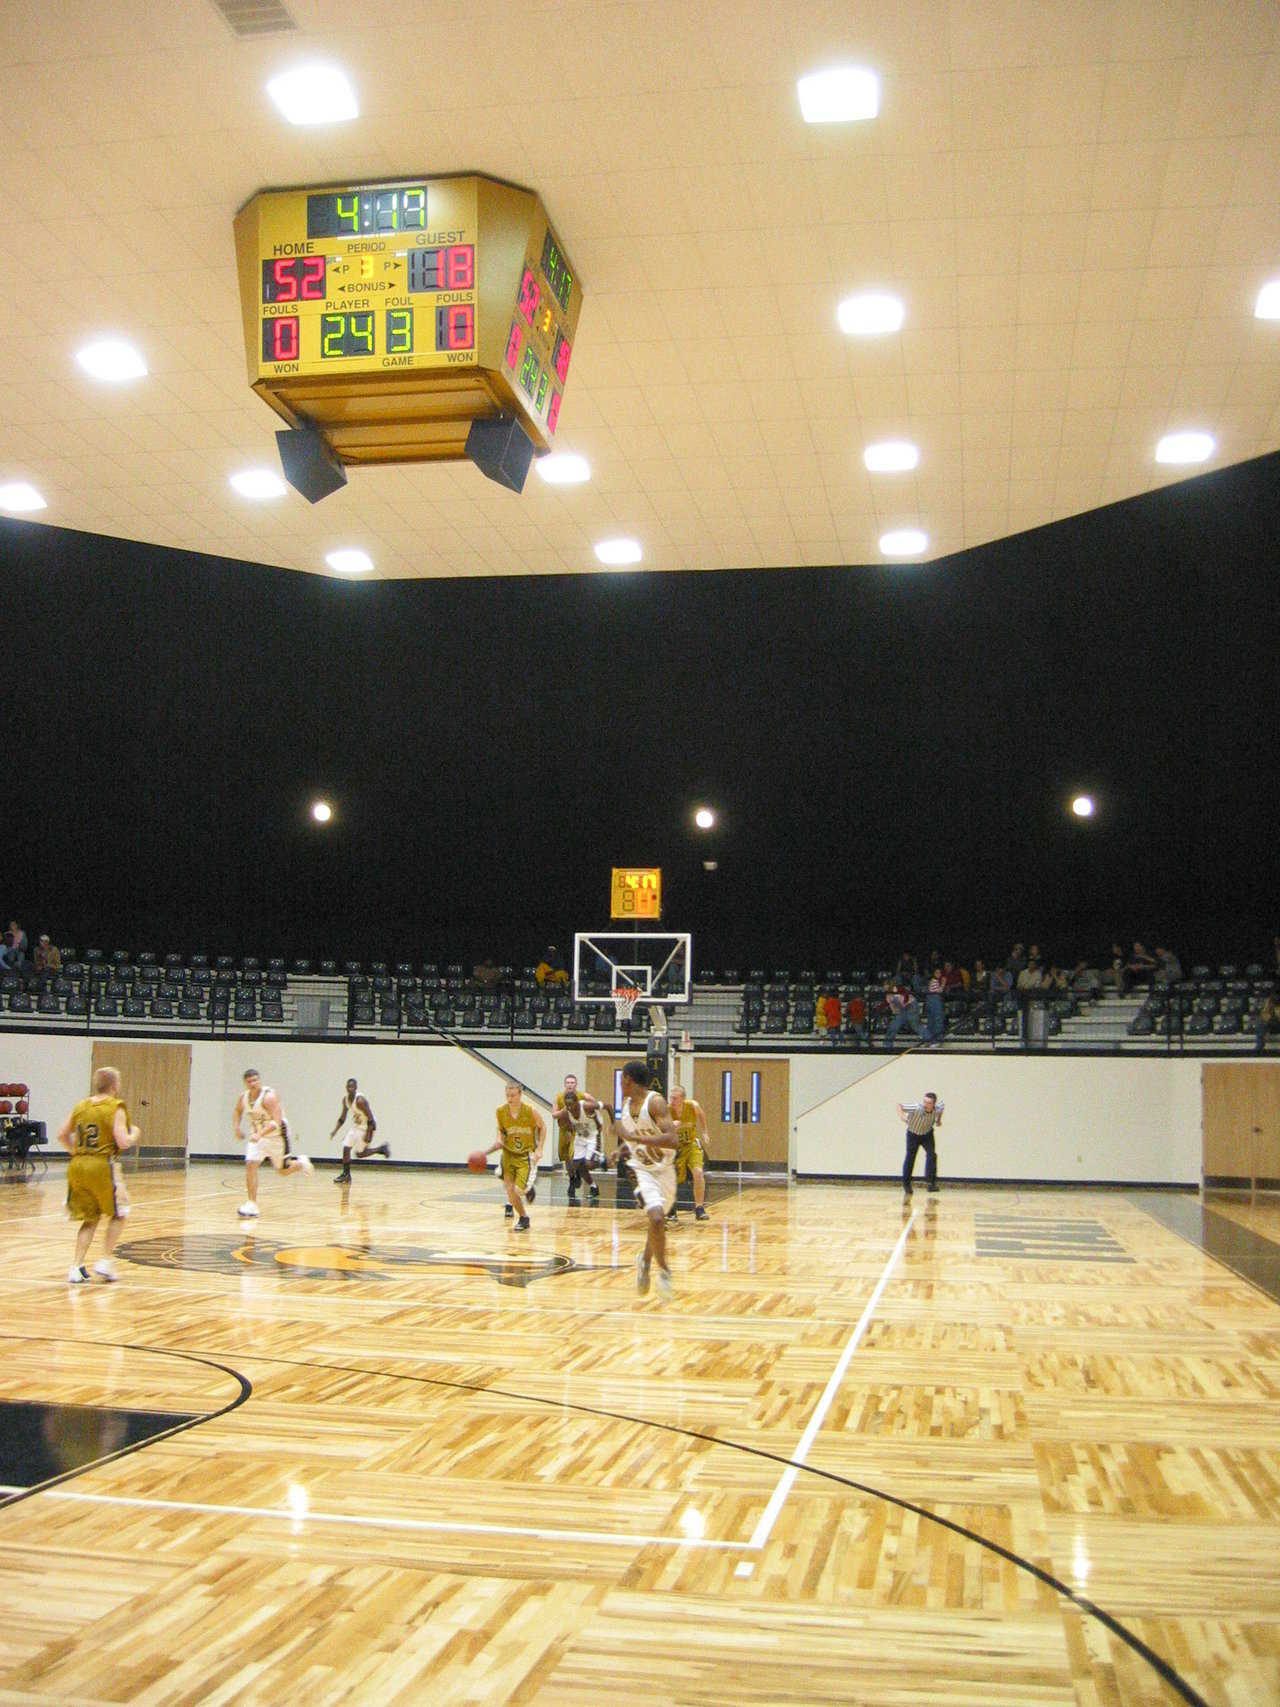 Single hung ceiling — Helps absorb sound in the Gladiator Coliseum in Italy, Texas.